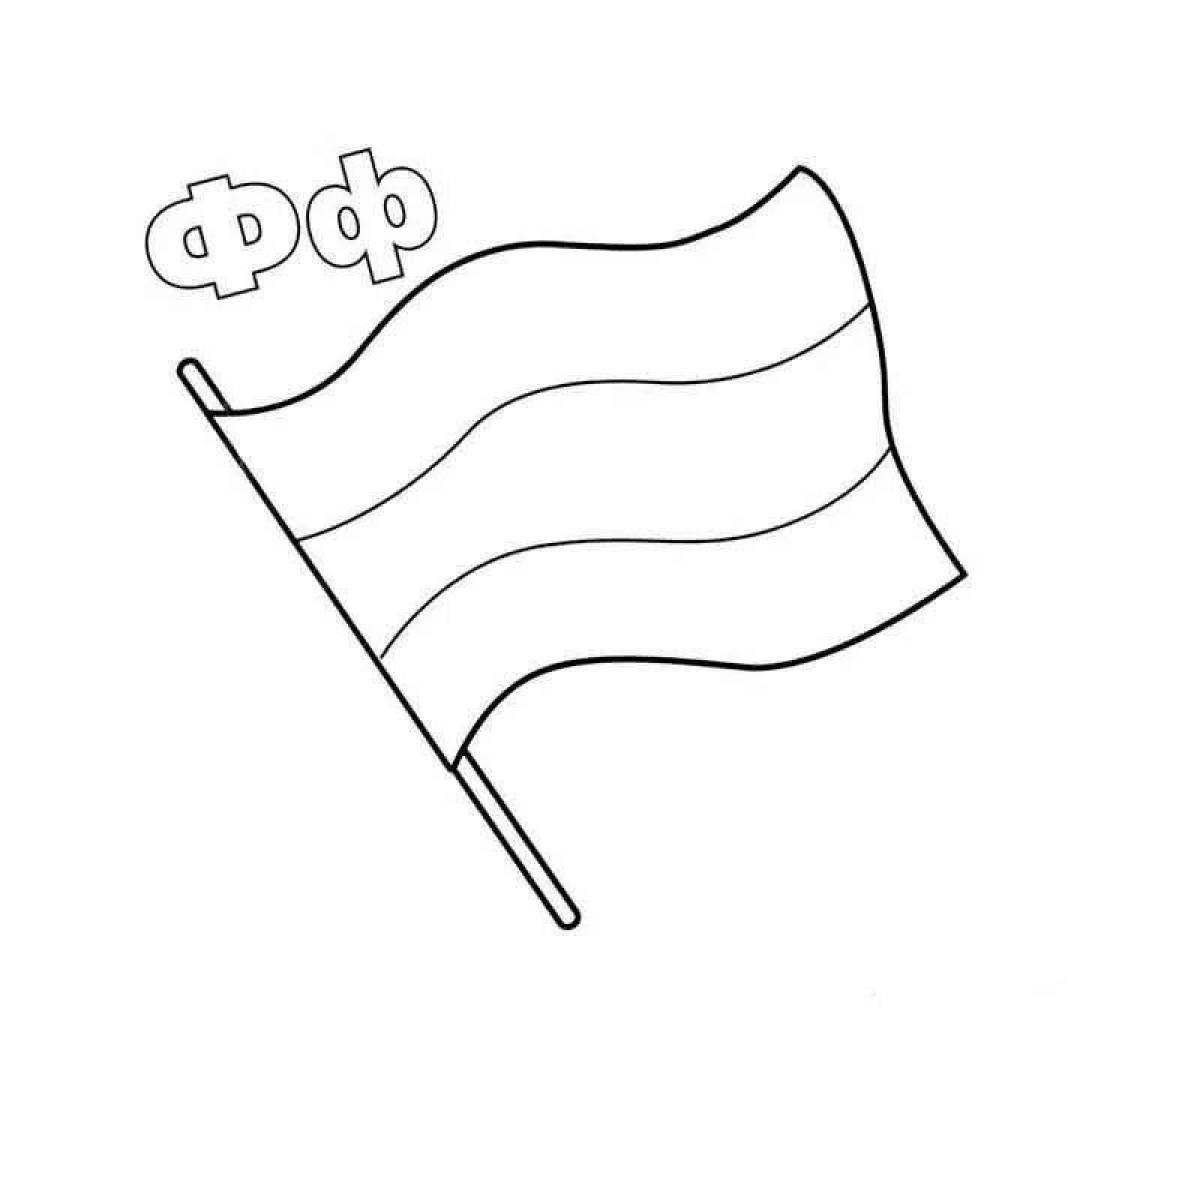 Adorable flag coloring book for kids